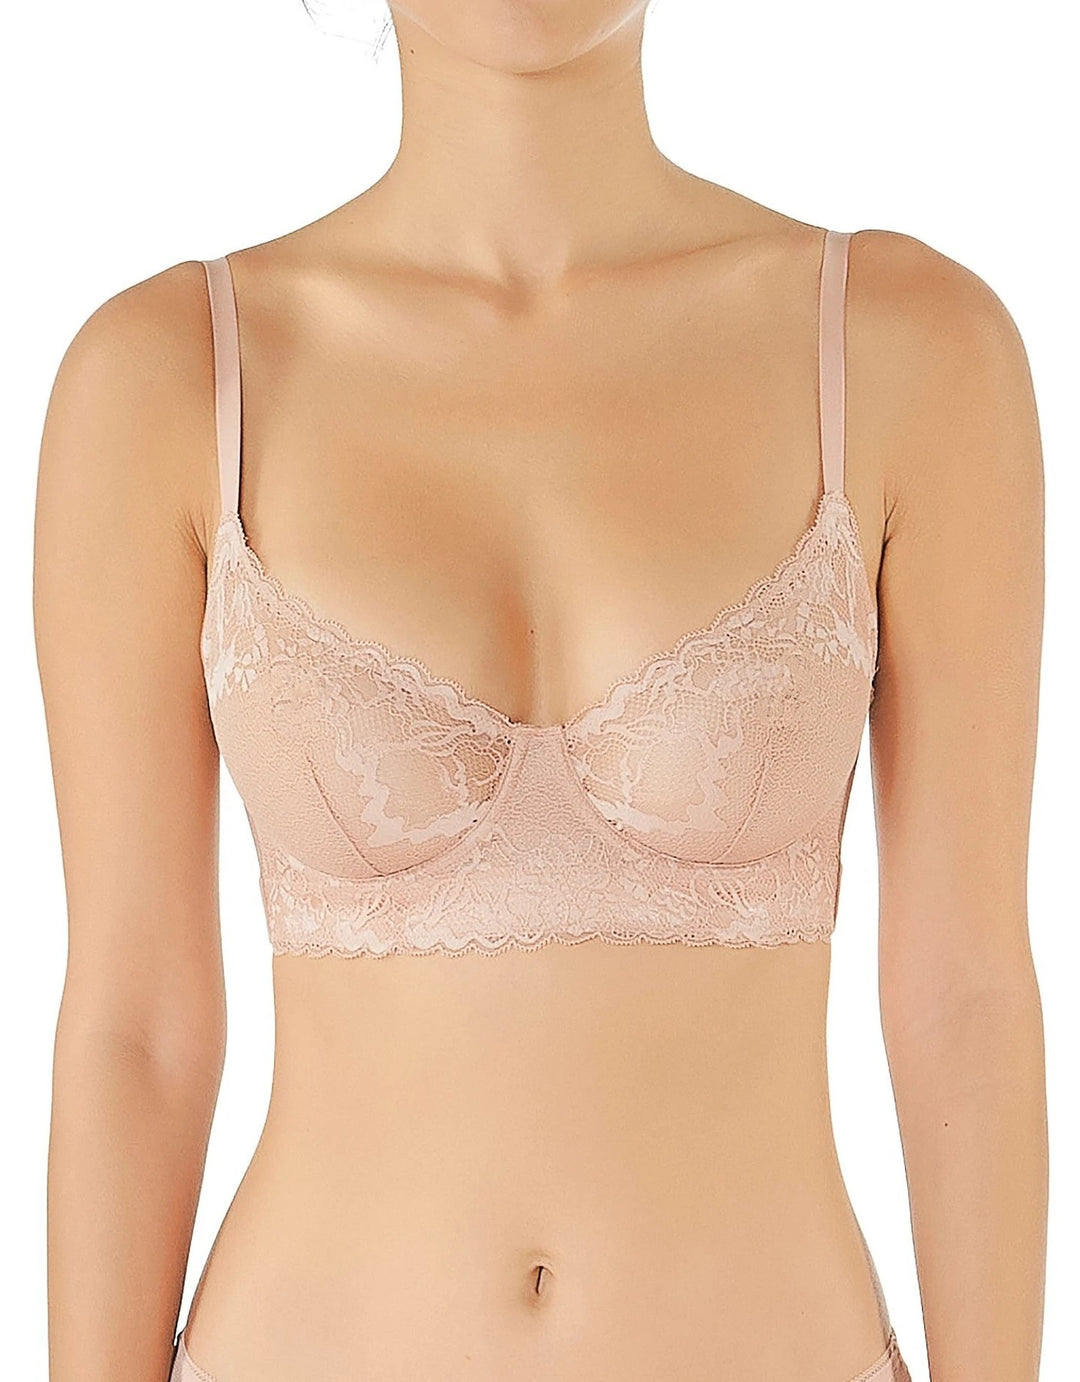 minihira butik Lace Massage Padded (supported) Underwire Imported